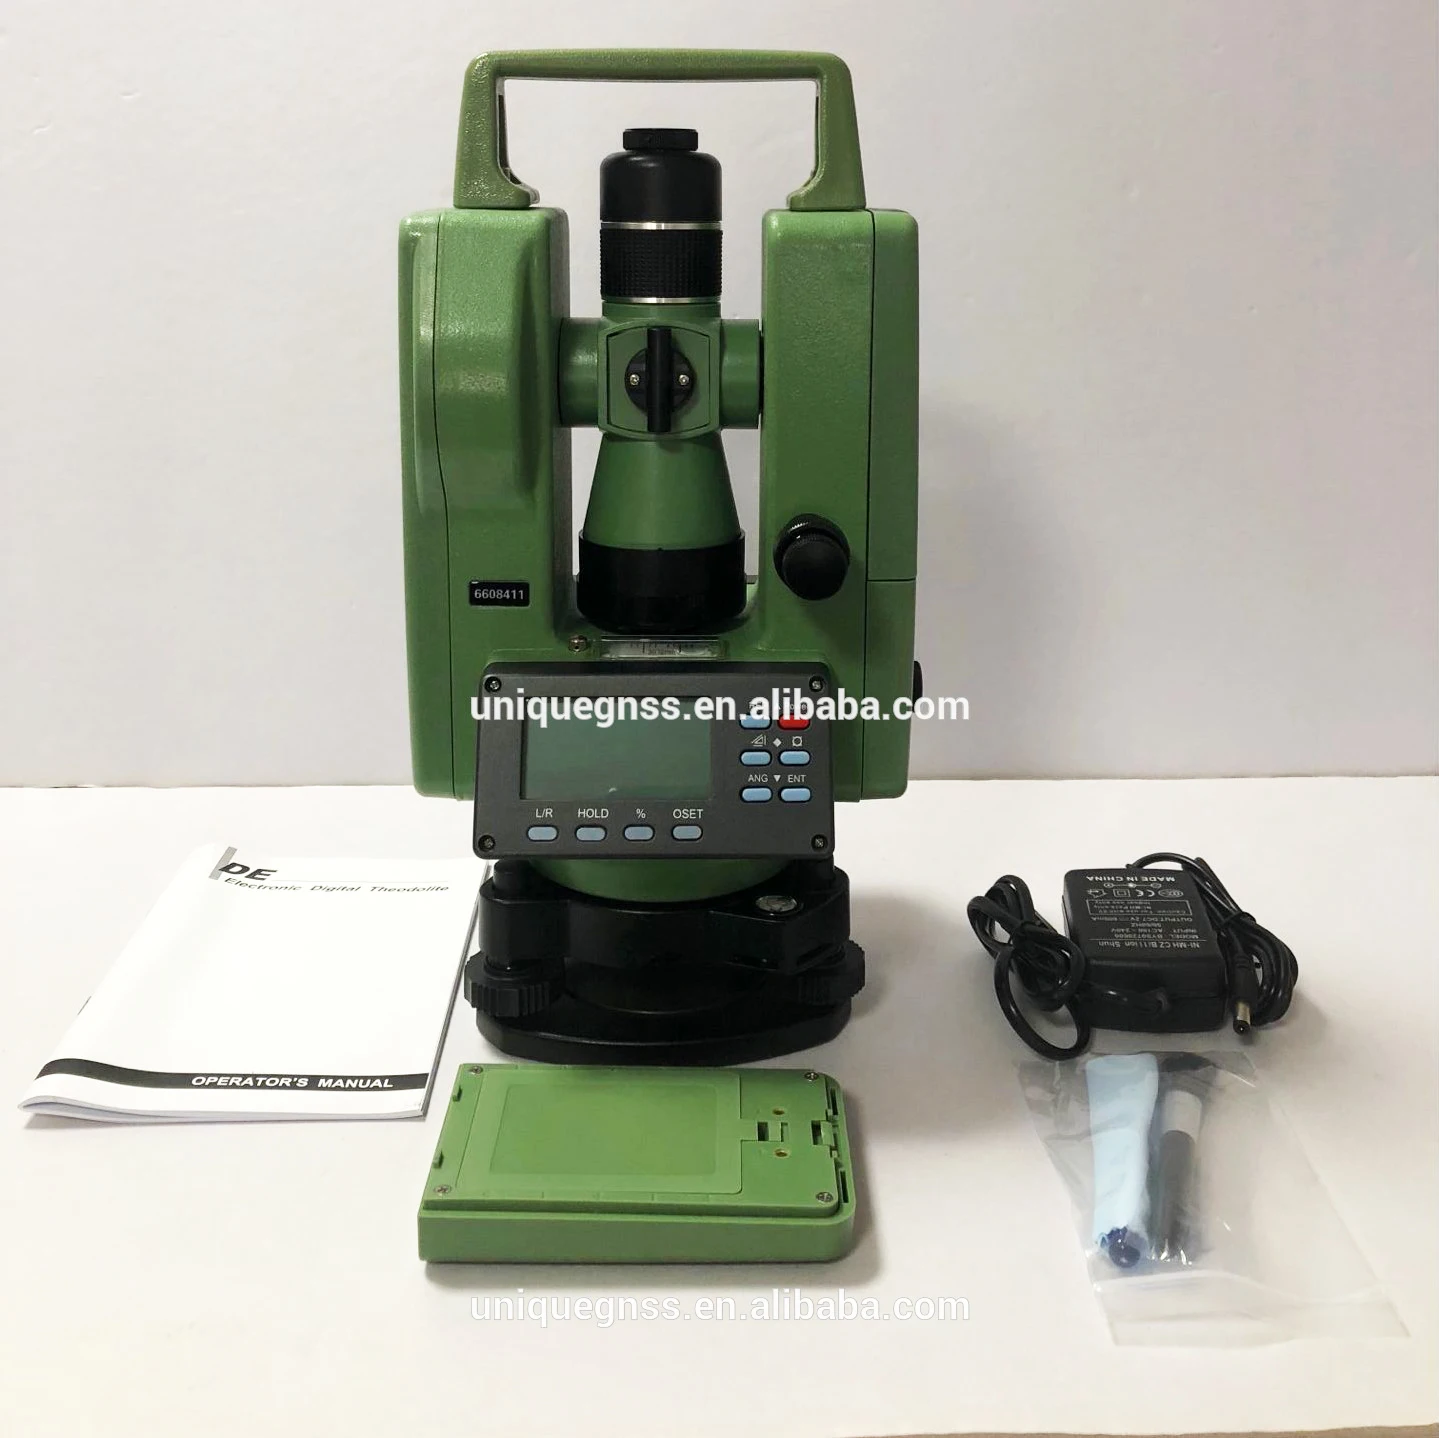 

Land Measuring Instrument Electronic Laser theodolite Prices Of Type DE2A-L